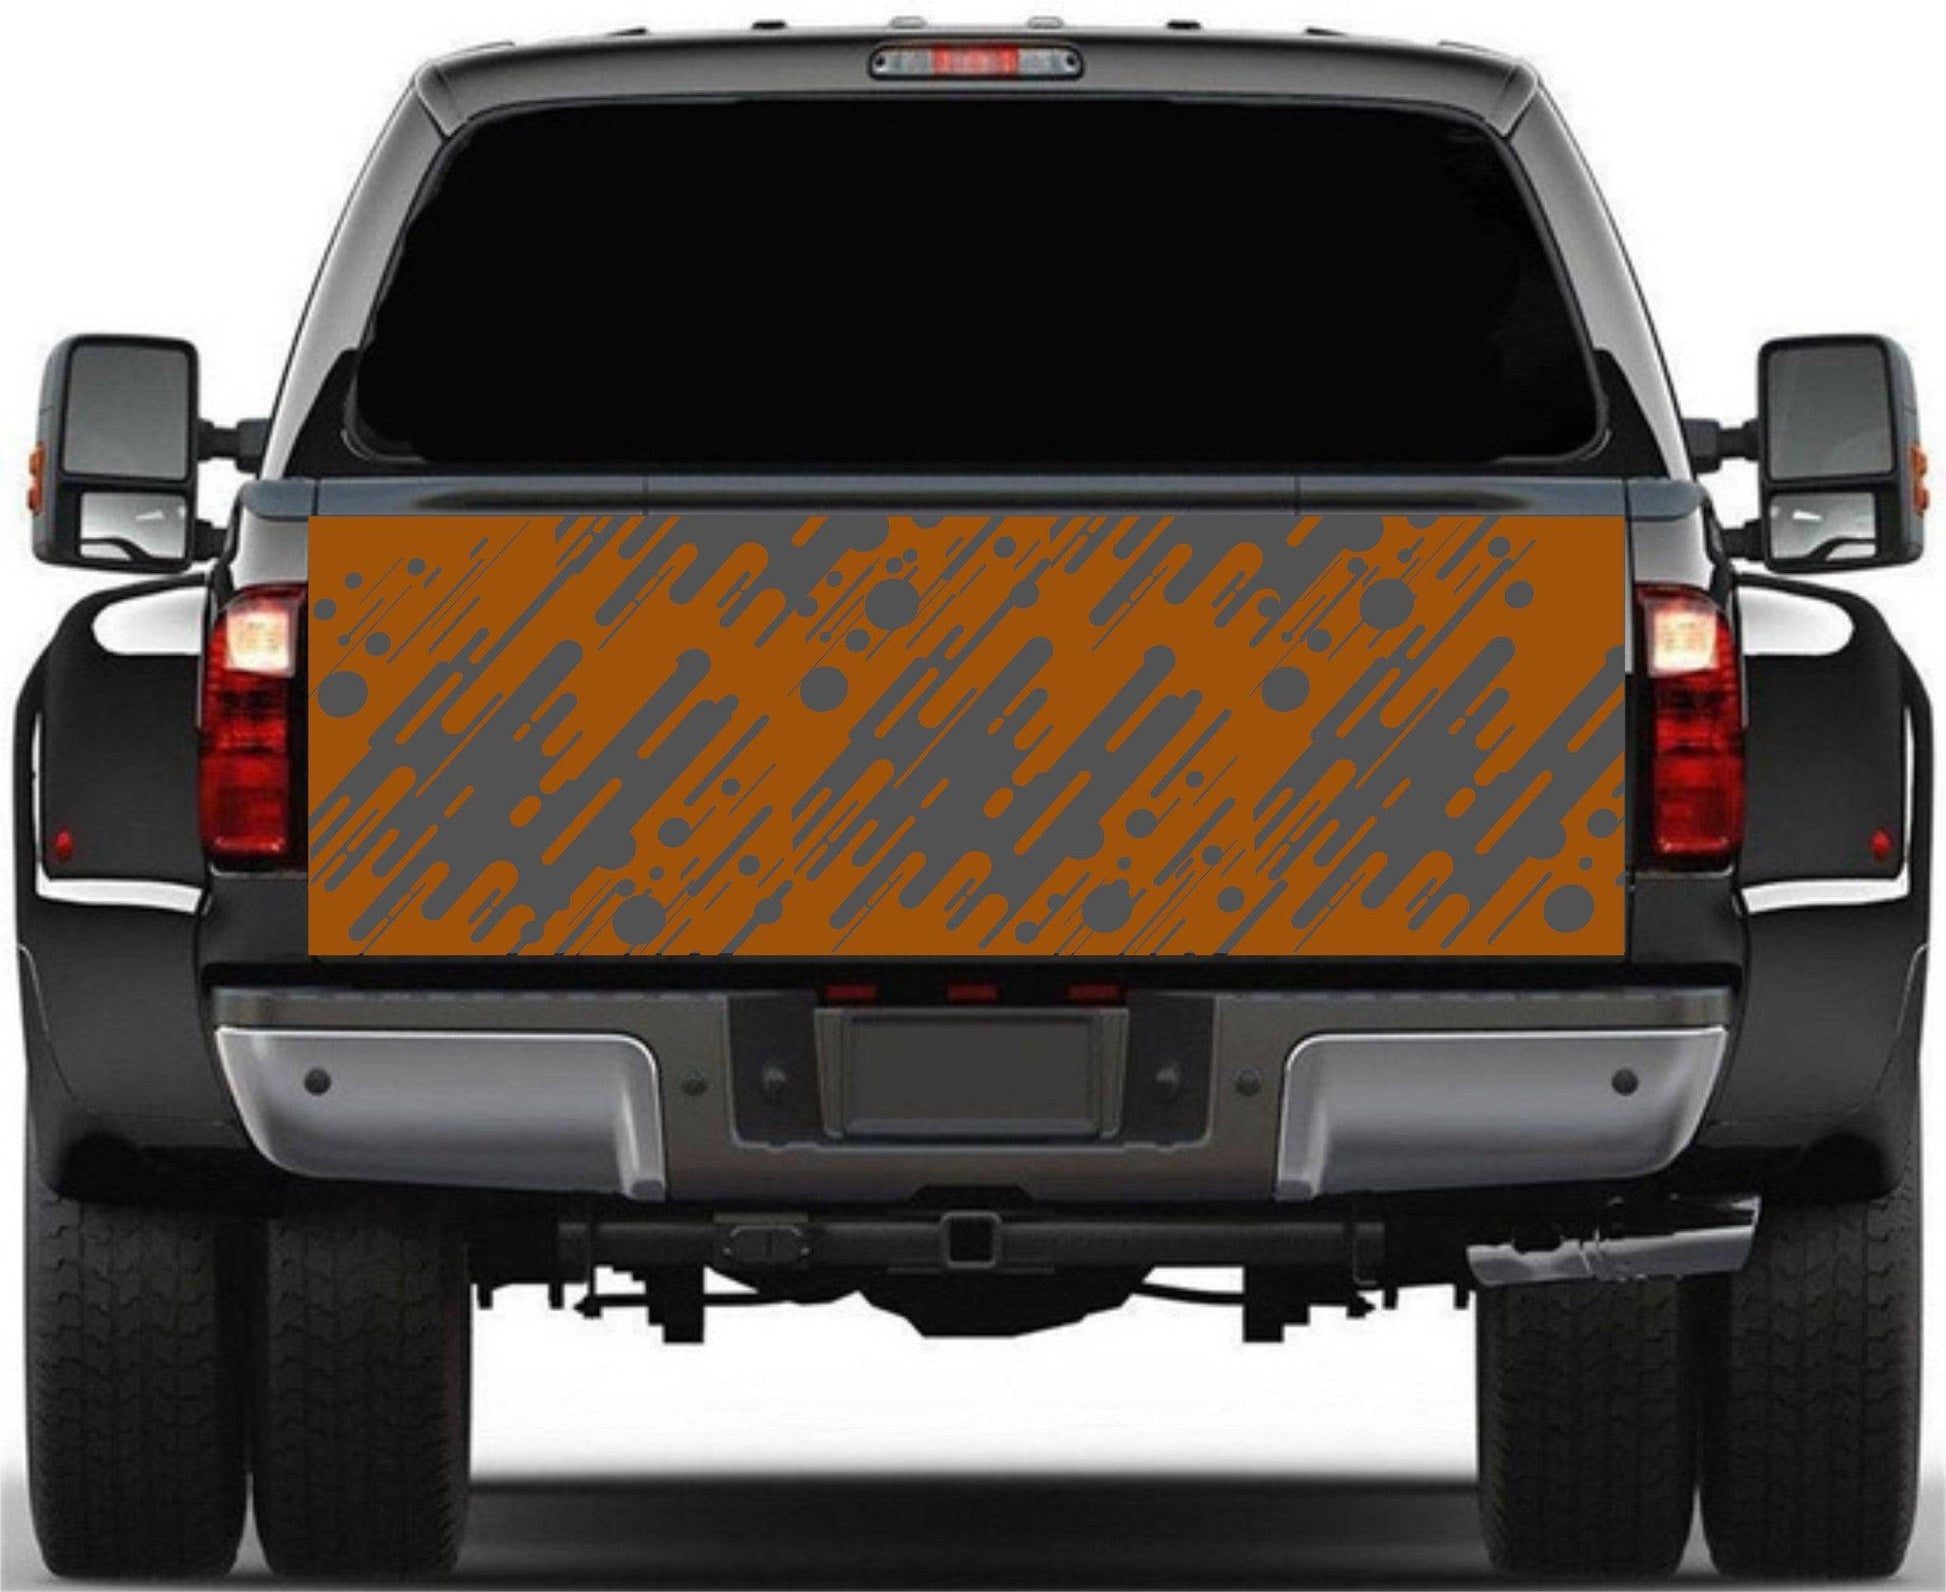 Geometric Eclectic Modern Design Cool Decals Stickers for  Any Trucks, SUV's, Vans, Tailgates, Bumpers...